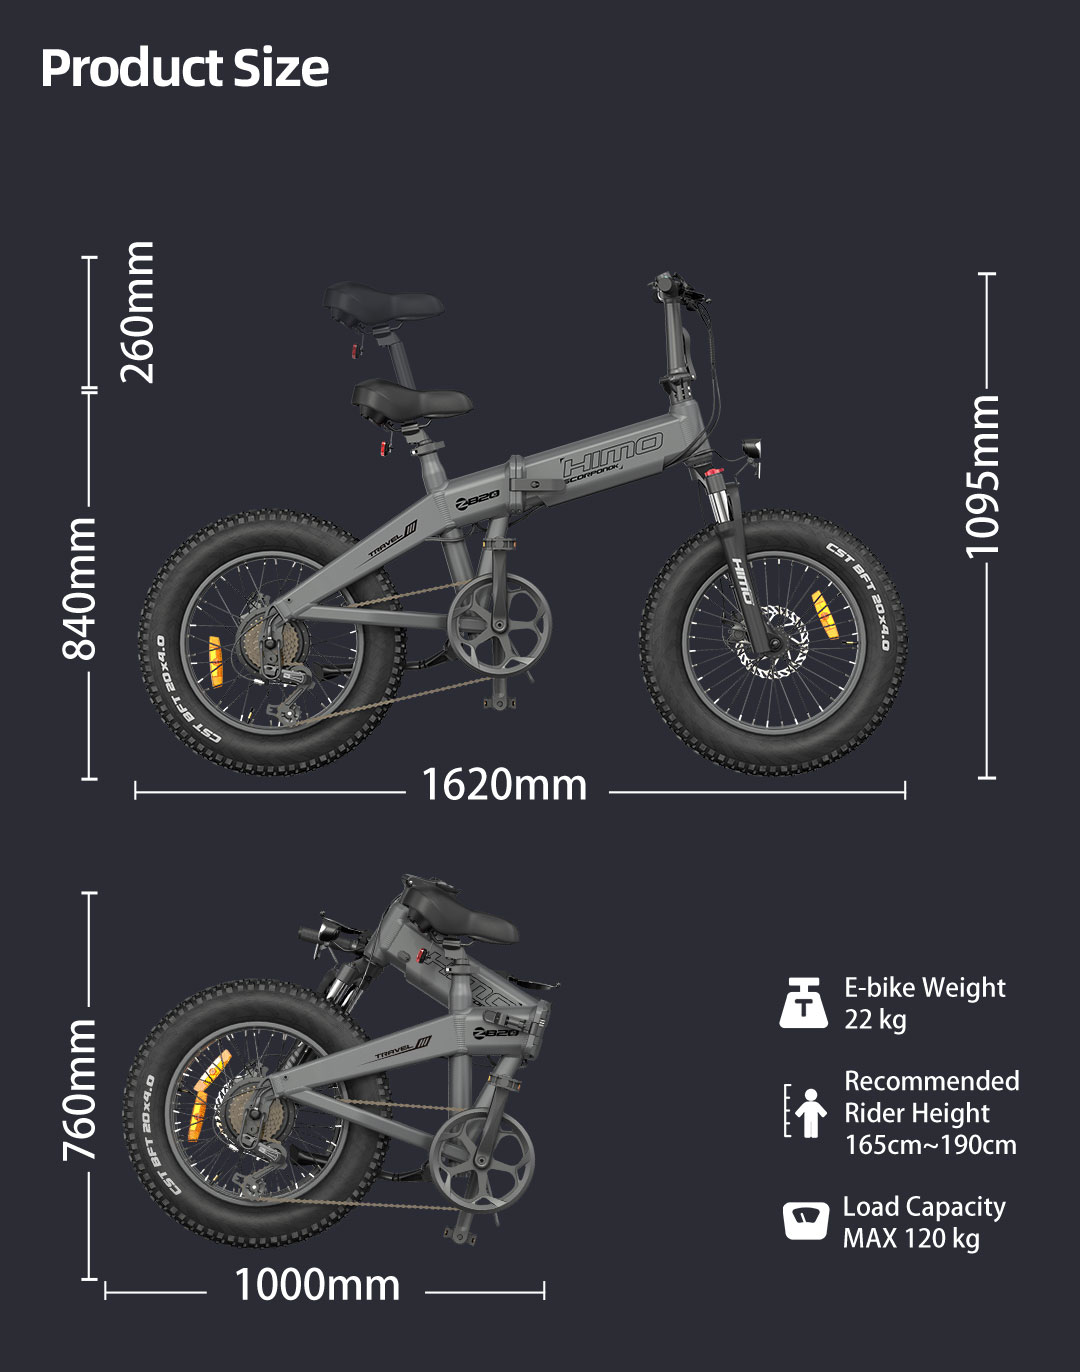 HIMO ZB20 MAX Global version Folding Electric Mountain Bike 20" Wheels 4 Inch Fat Wide Tires 350W Motor Shimano 6 Speeds Derailleur 48V 10Ah Detachable Lithium Battery Dual Disc Brake Hydraulic Shock Folk LCD Display Up to 80km - Grey